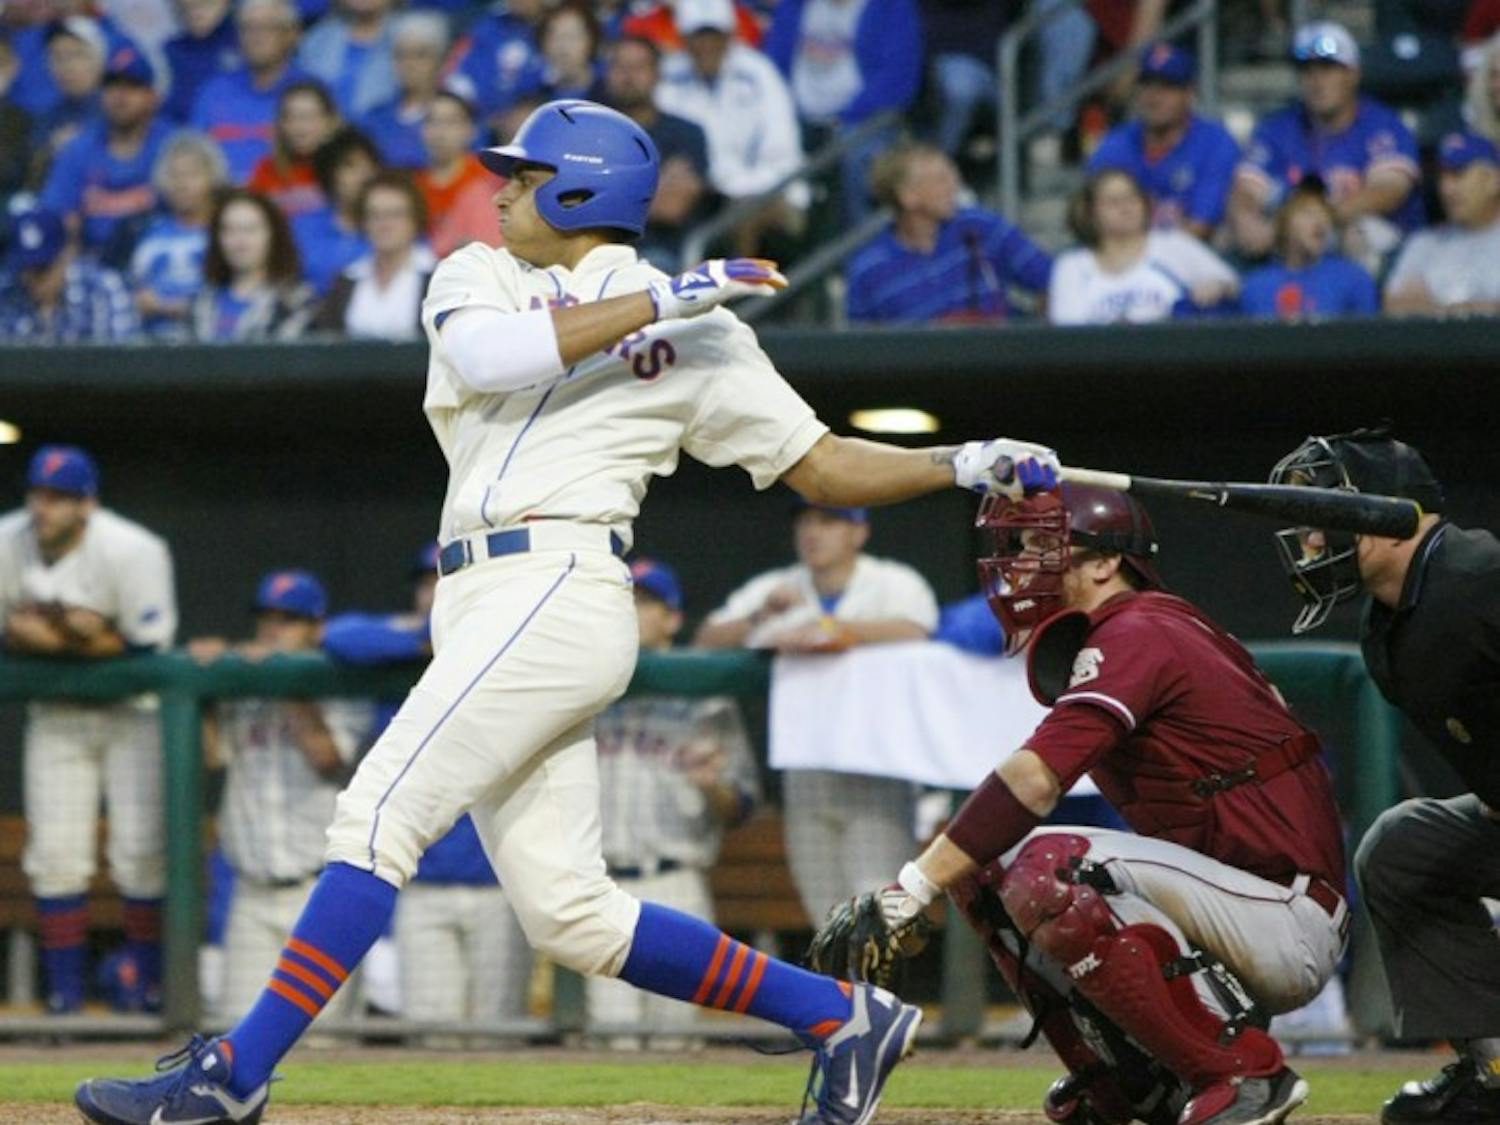 Junior transfer Vickash Ramjit has found a spot in UF’s lineup following injuries to Tyler Thompson and Josh Tobias. He has hit three home runs since March 23.